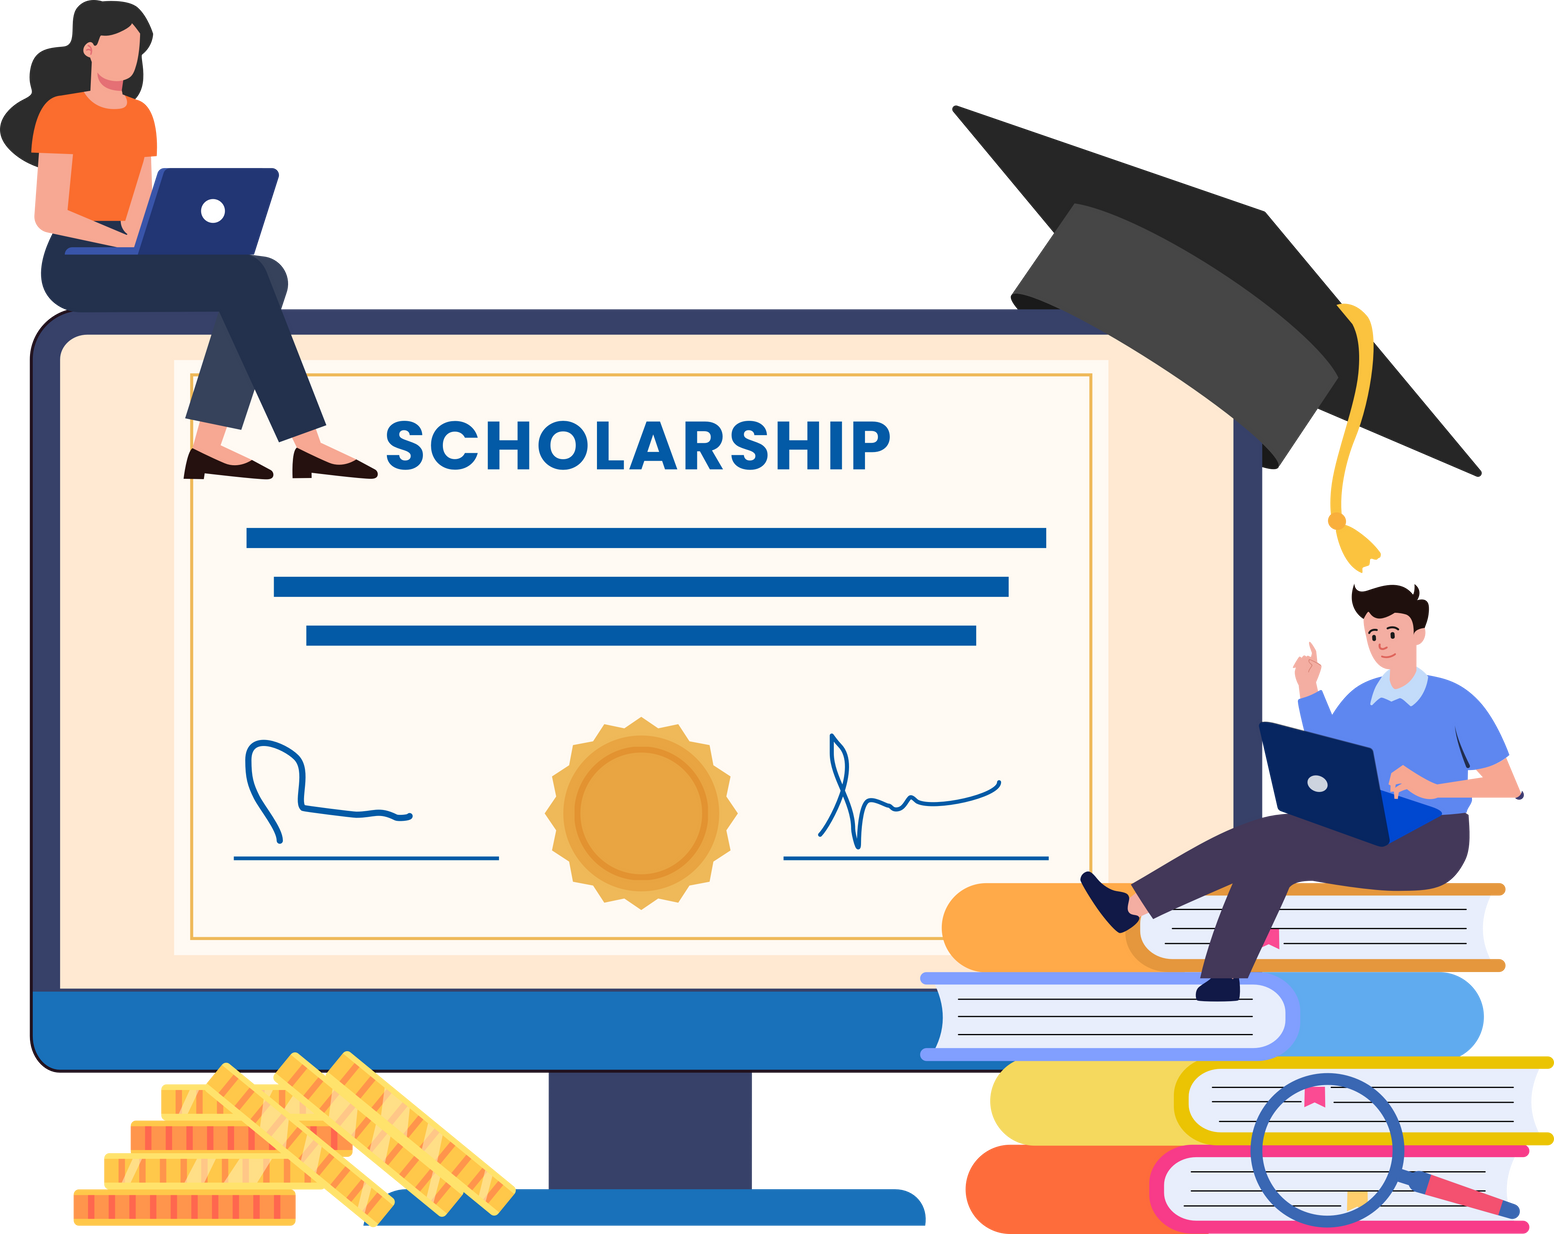 Student on laptop applying for a scholarship student loans, scholarships Education concept